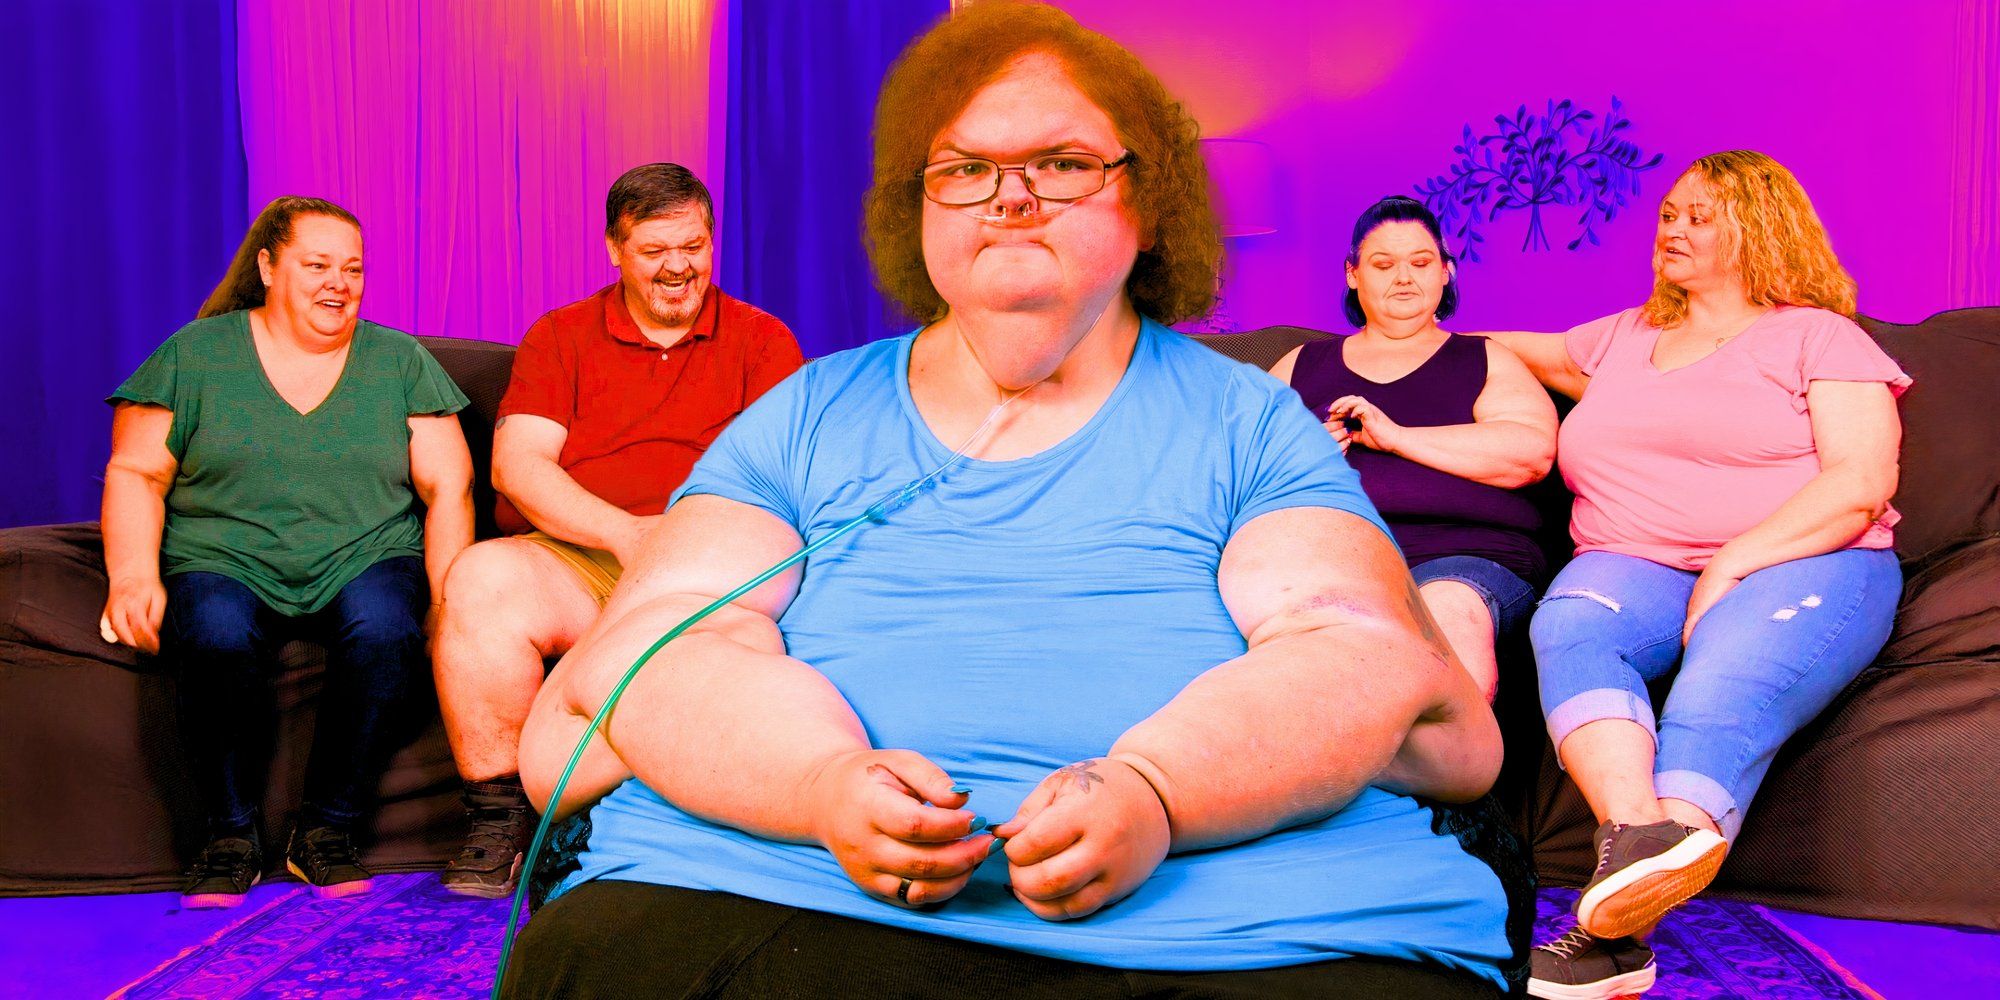 1000-Lb Sisters Season 5 cast in montage of tammy slaton with other cast members in the background on a couch including amy slaton and chris combs